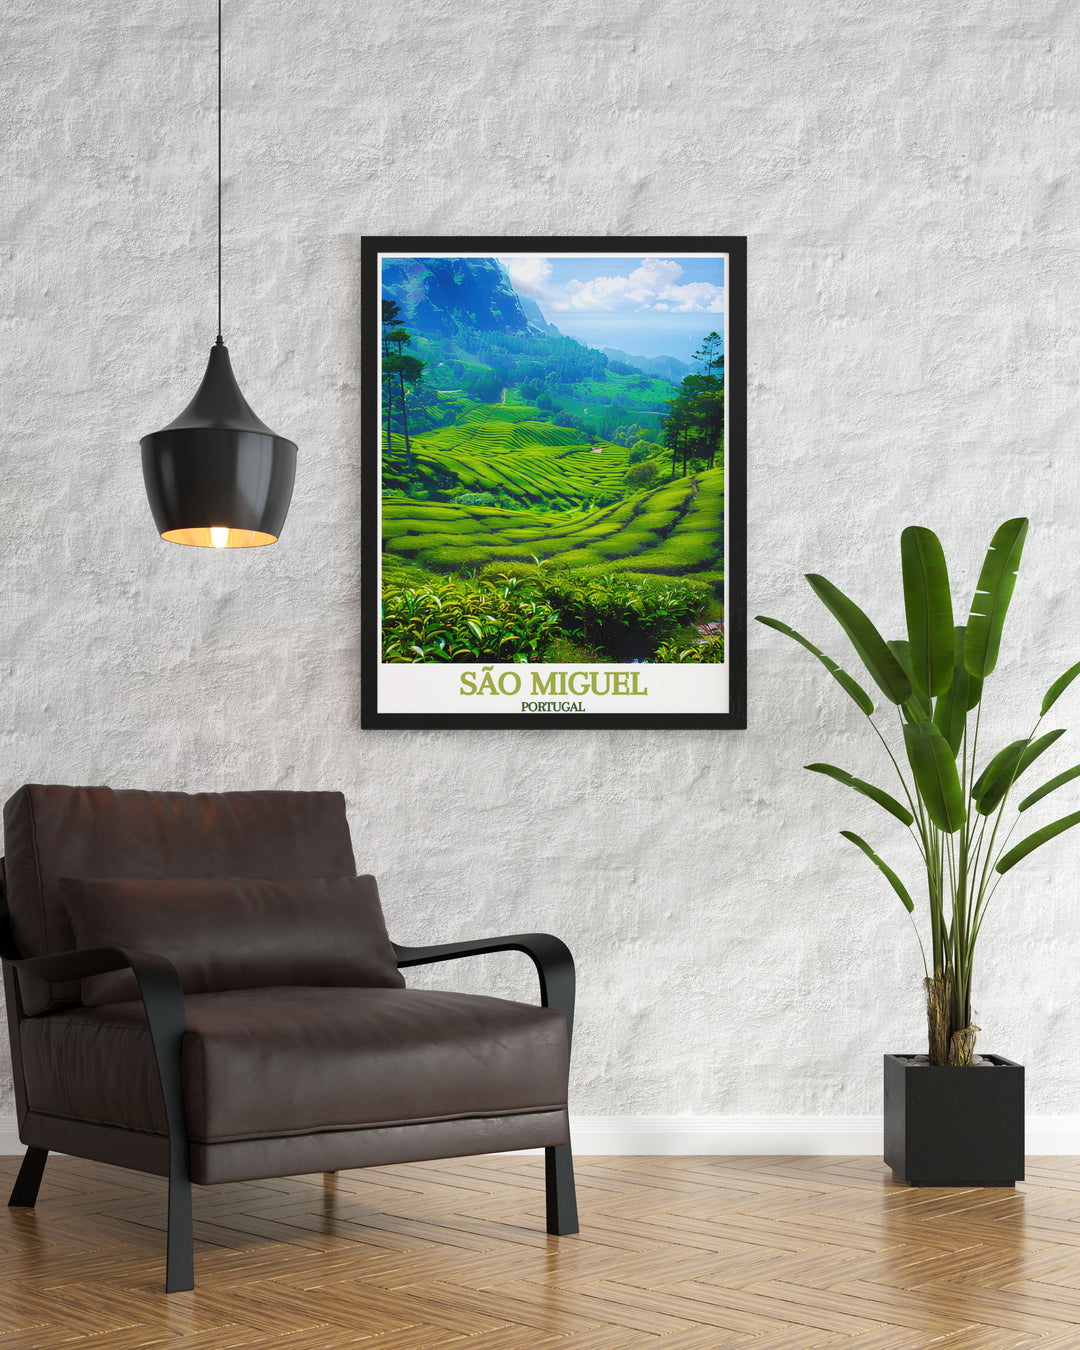 Add a touch of Portugals natural heritage to your decor with this art print of São Miguels tea plantations, showcasing the vibrant fields and traditional tea processing.